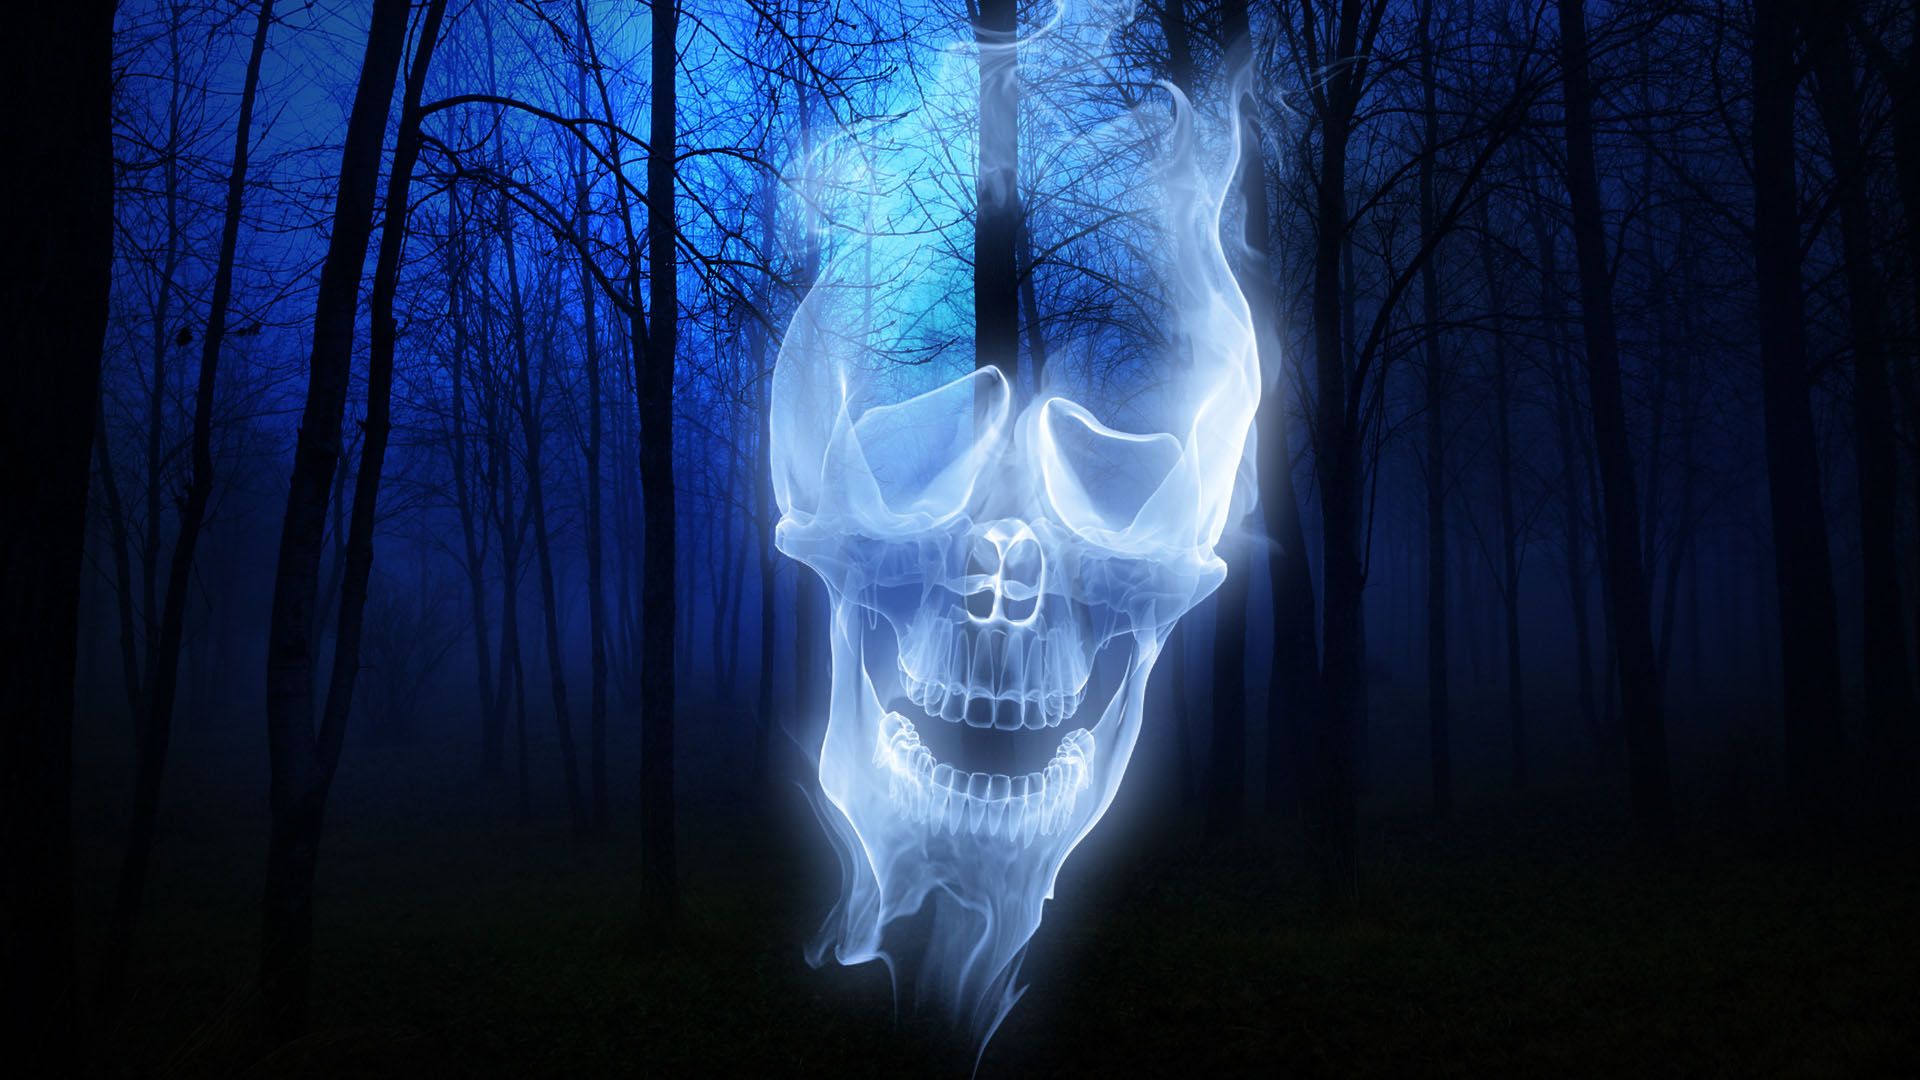 ghost, holiday, halloween, forest, spooky images